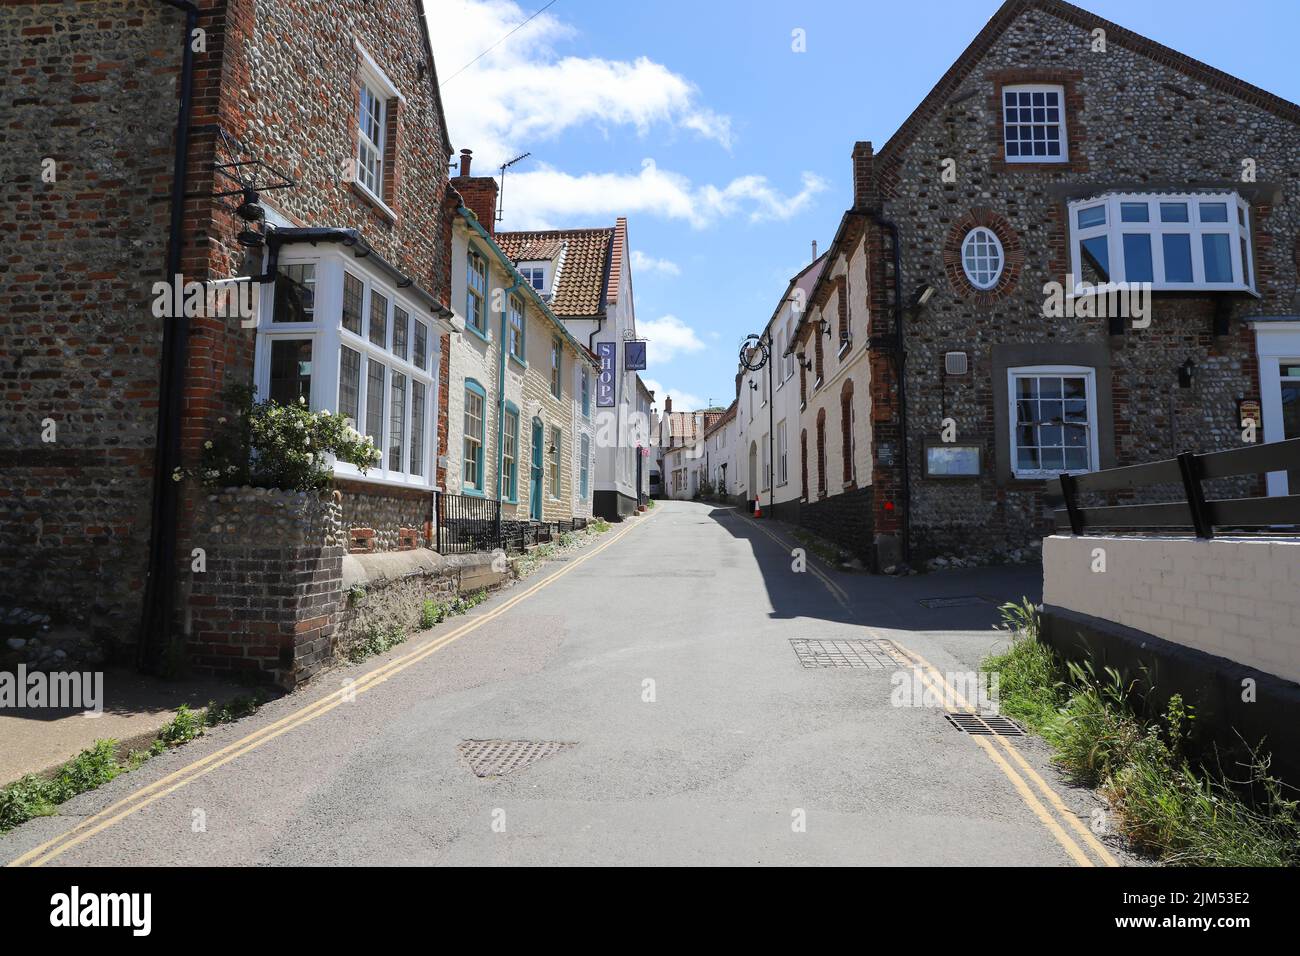 Traditional Flint built houses and shops in the High Street of Blakeney, North Norfolk in the UK Stock Photo